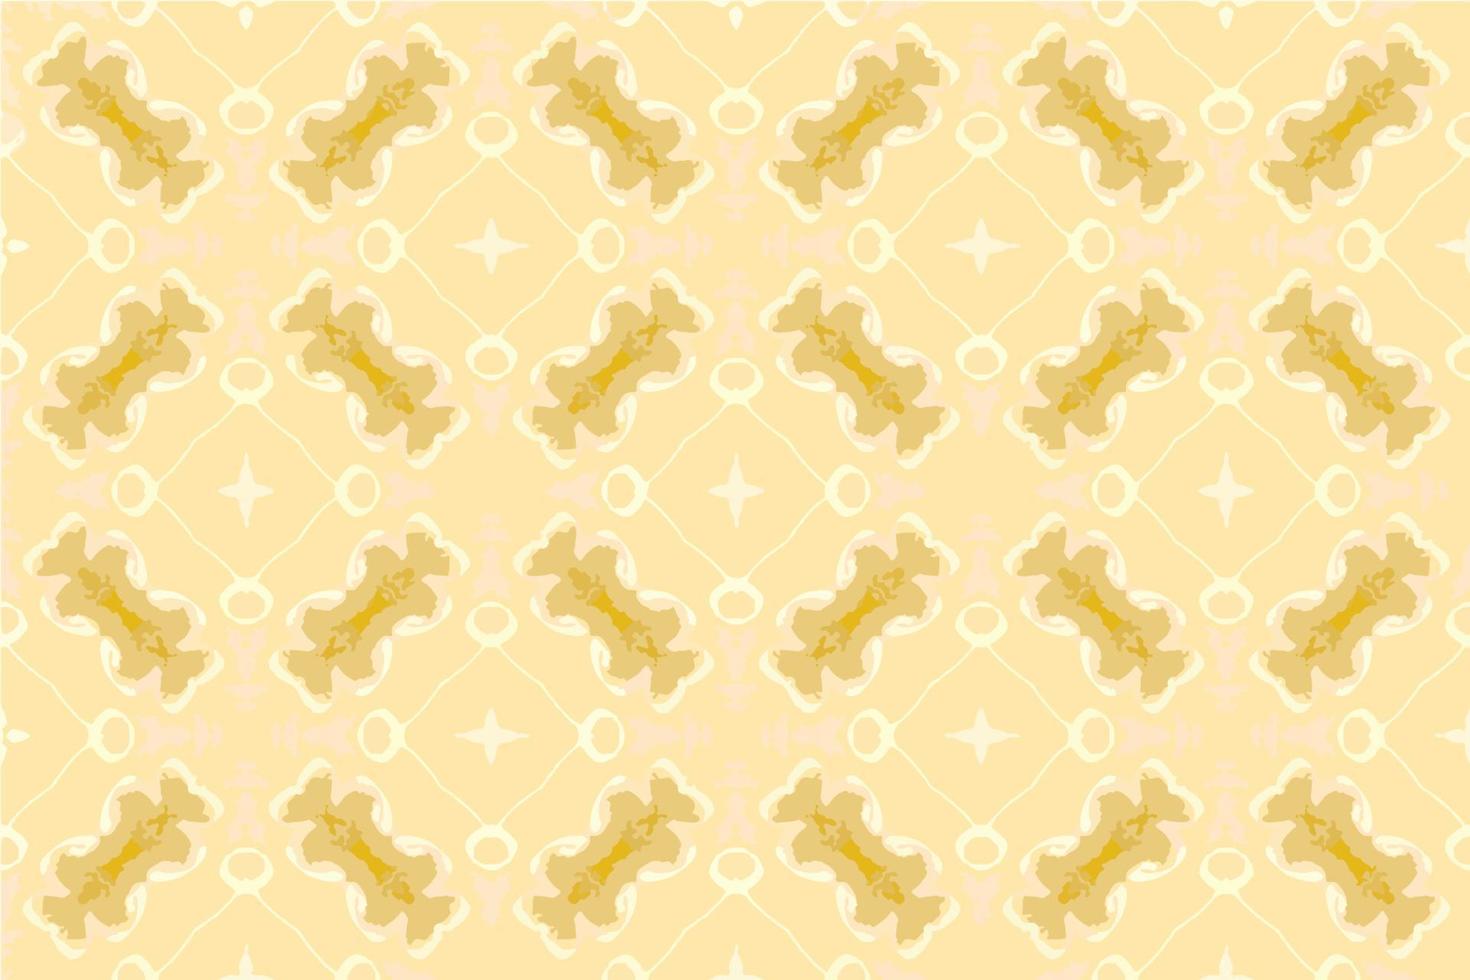 Abstract seamless pattern, seamless wallpaper, seamless background designed for use for interior,wallpaper,fabric,curtain,carpet,clothing,Batik,satin,background , illustration, Embroidery style. vector